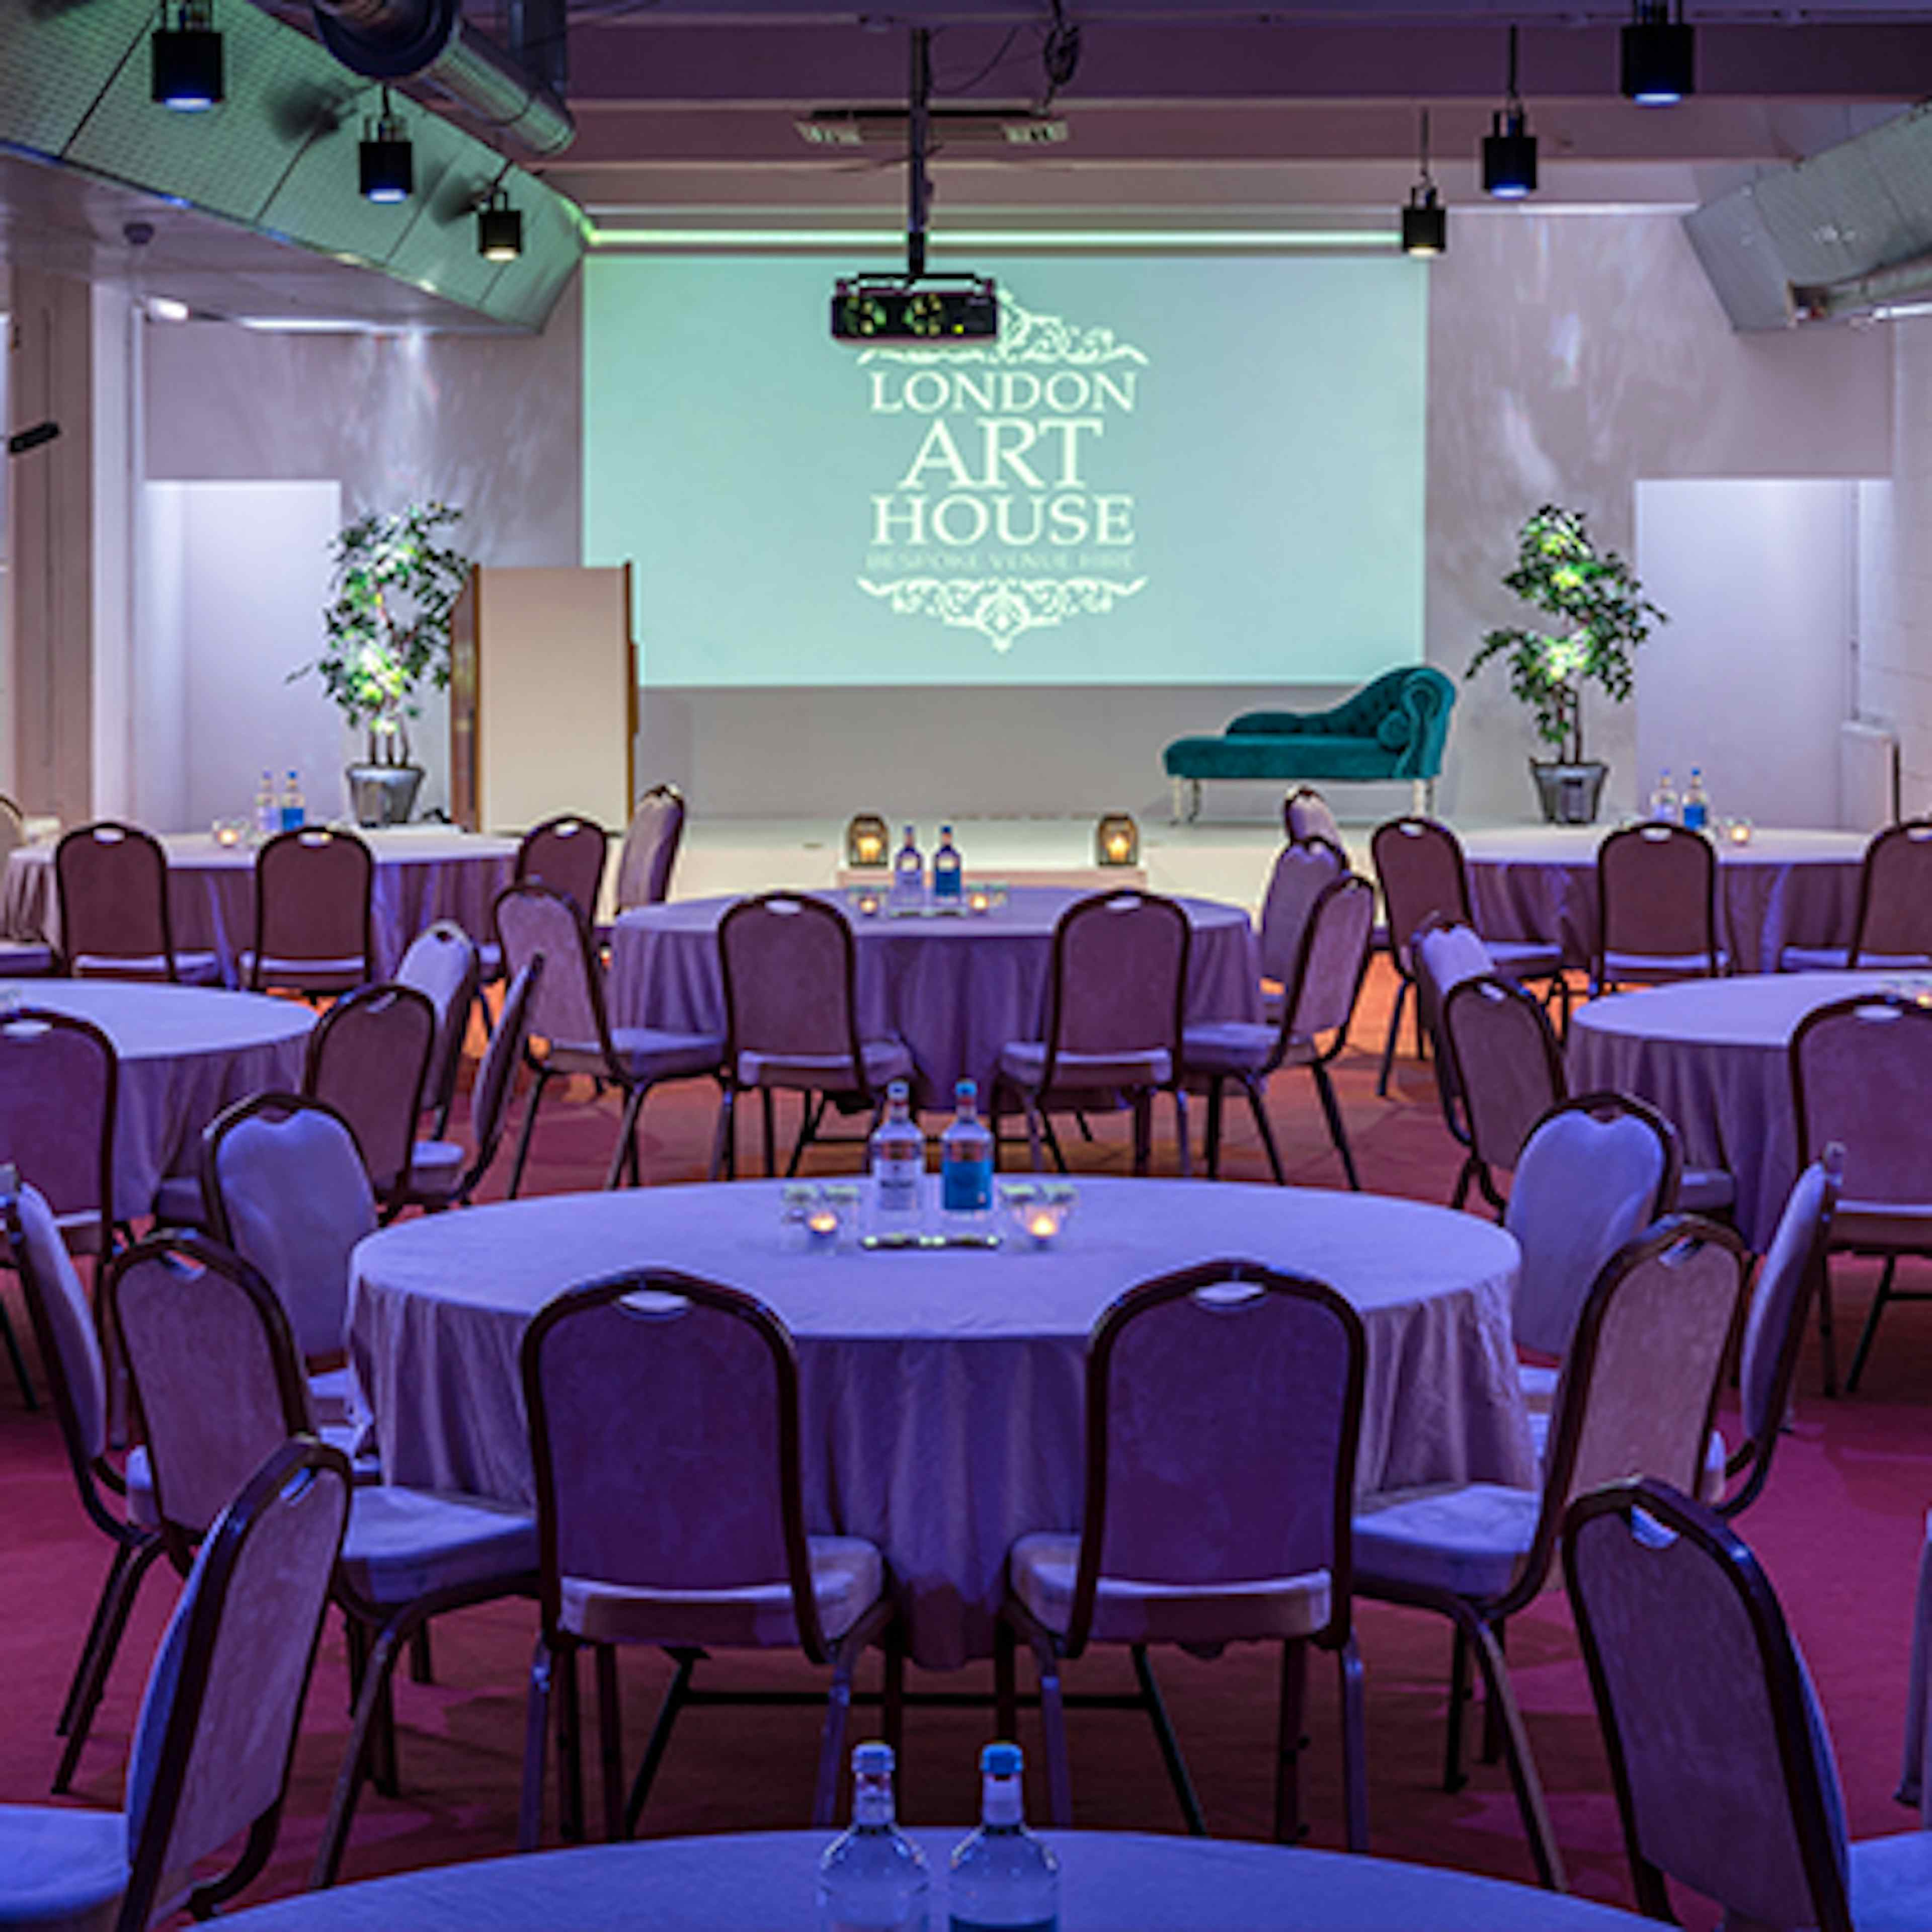 London Art House - Conference Hall image 2